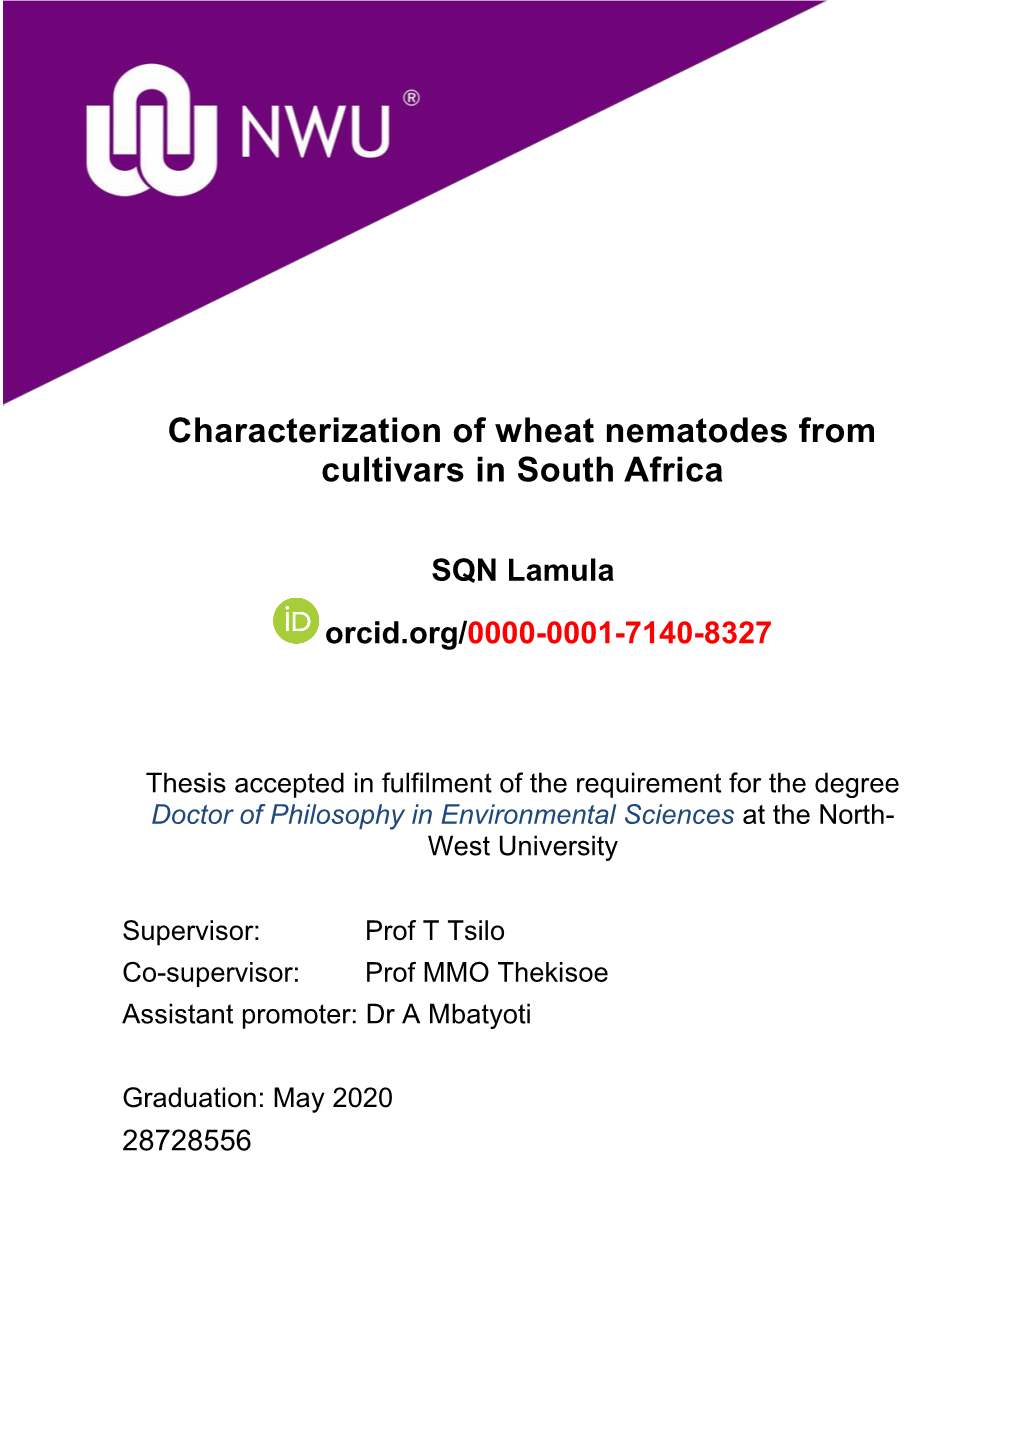 Characterization of Wheat Nematodes from Cultivars in South Africa